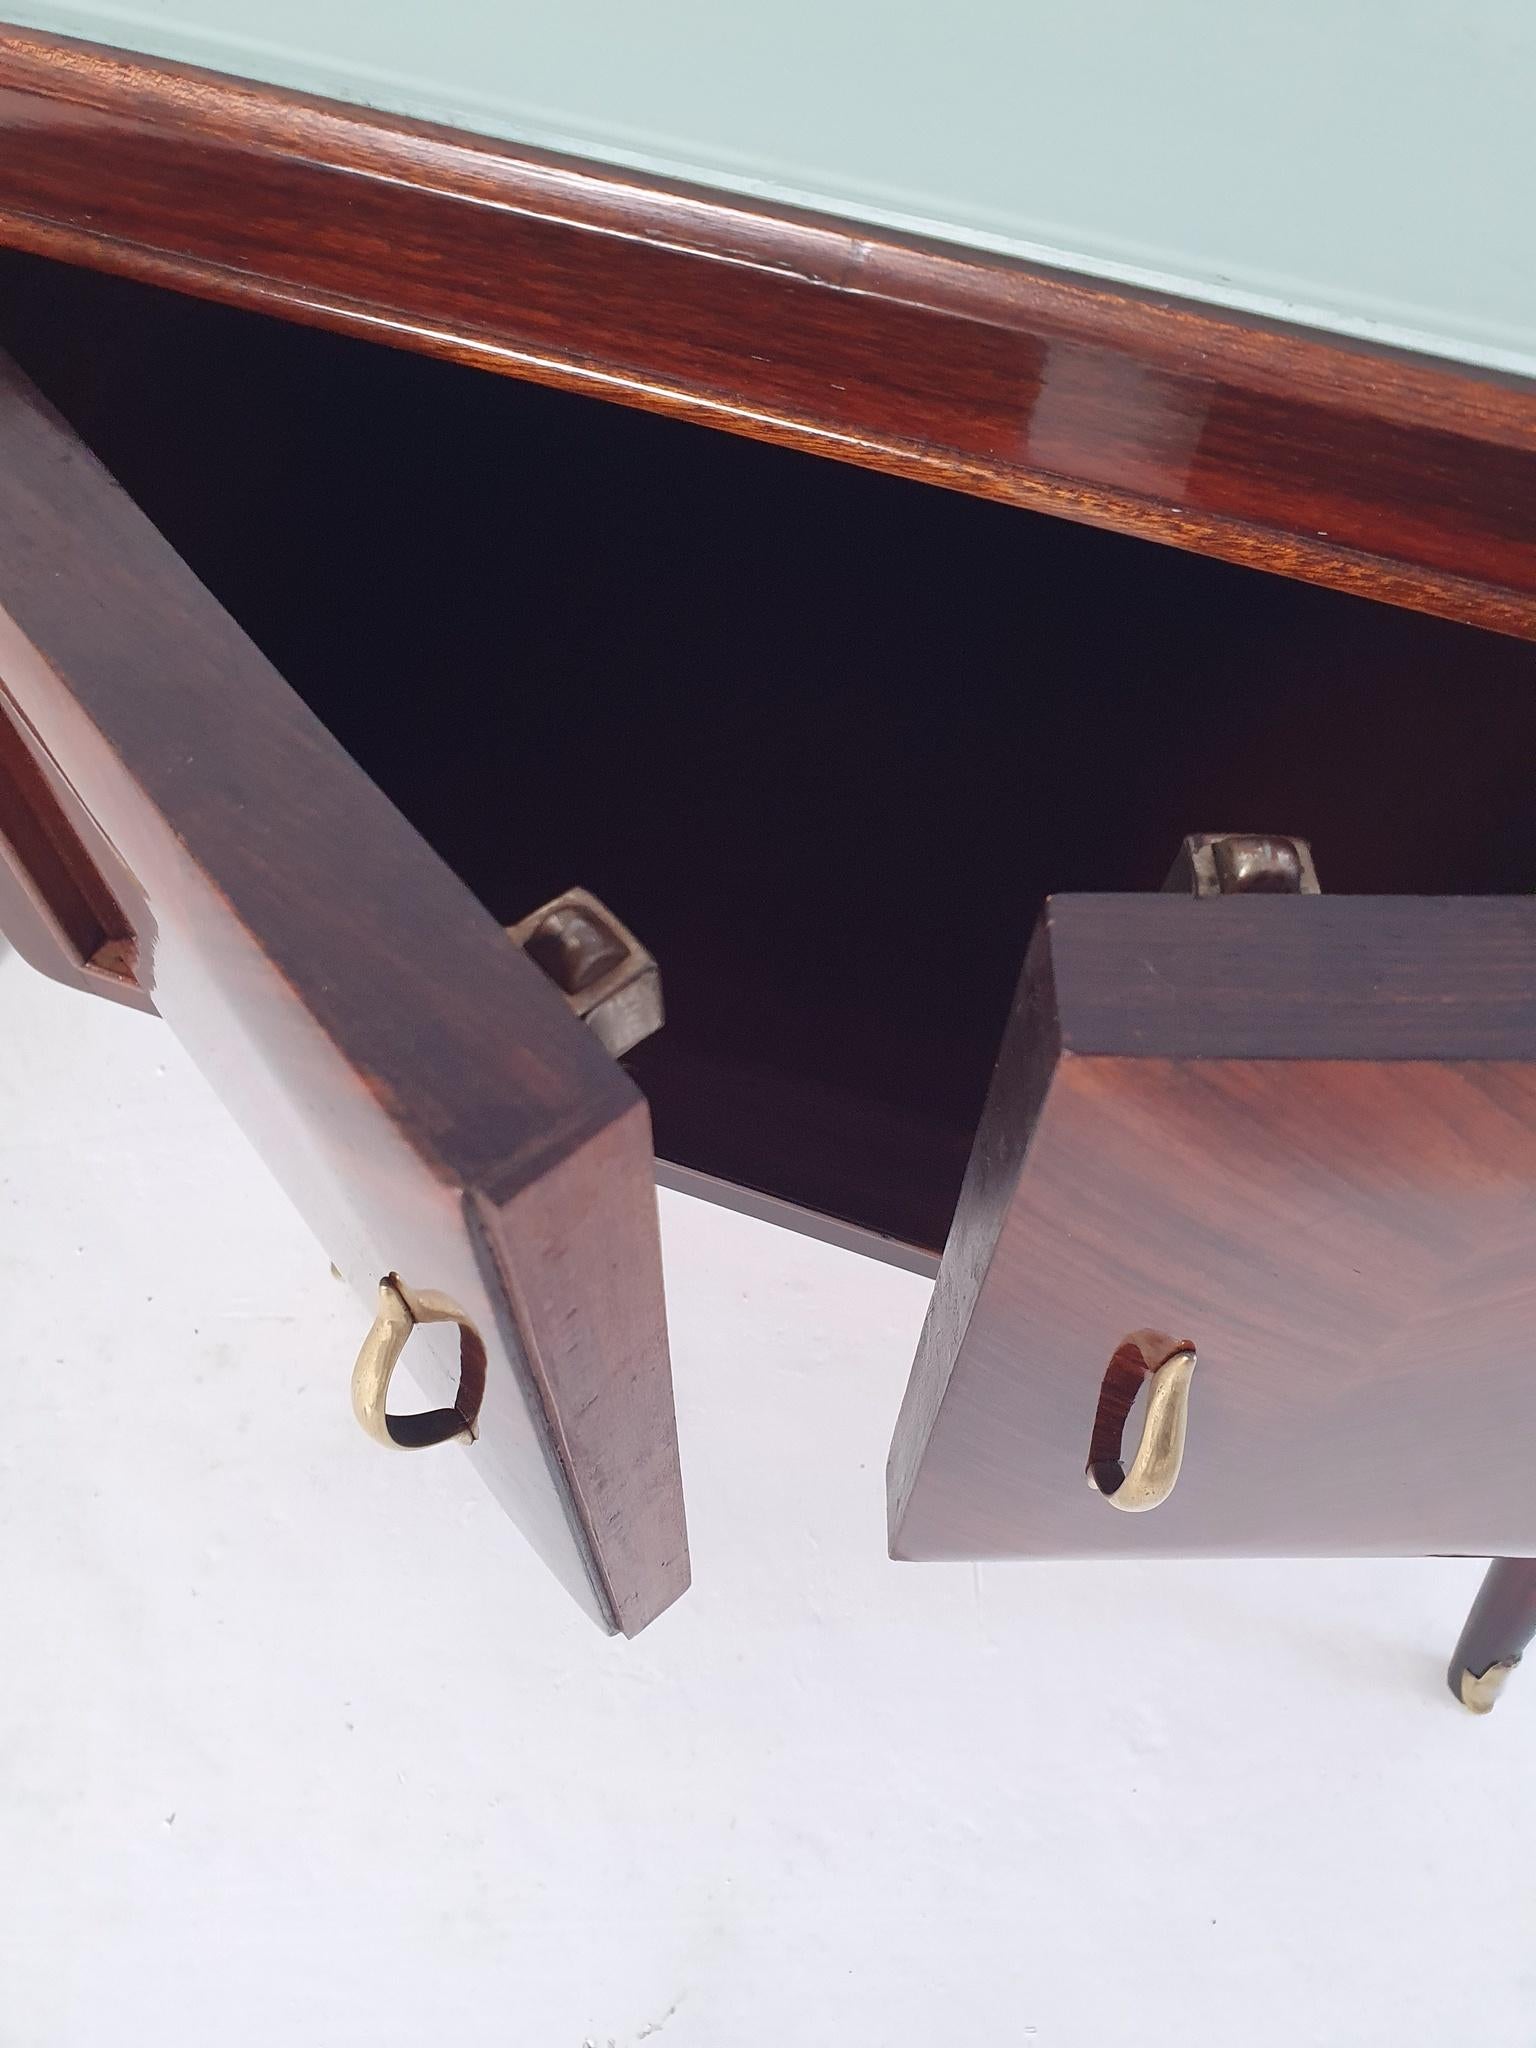 Pair of Nightstands in style of Ico Parisi, Italy 2